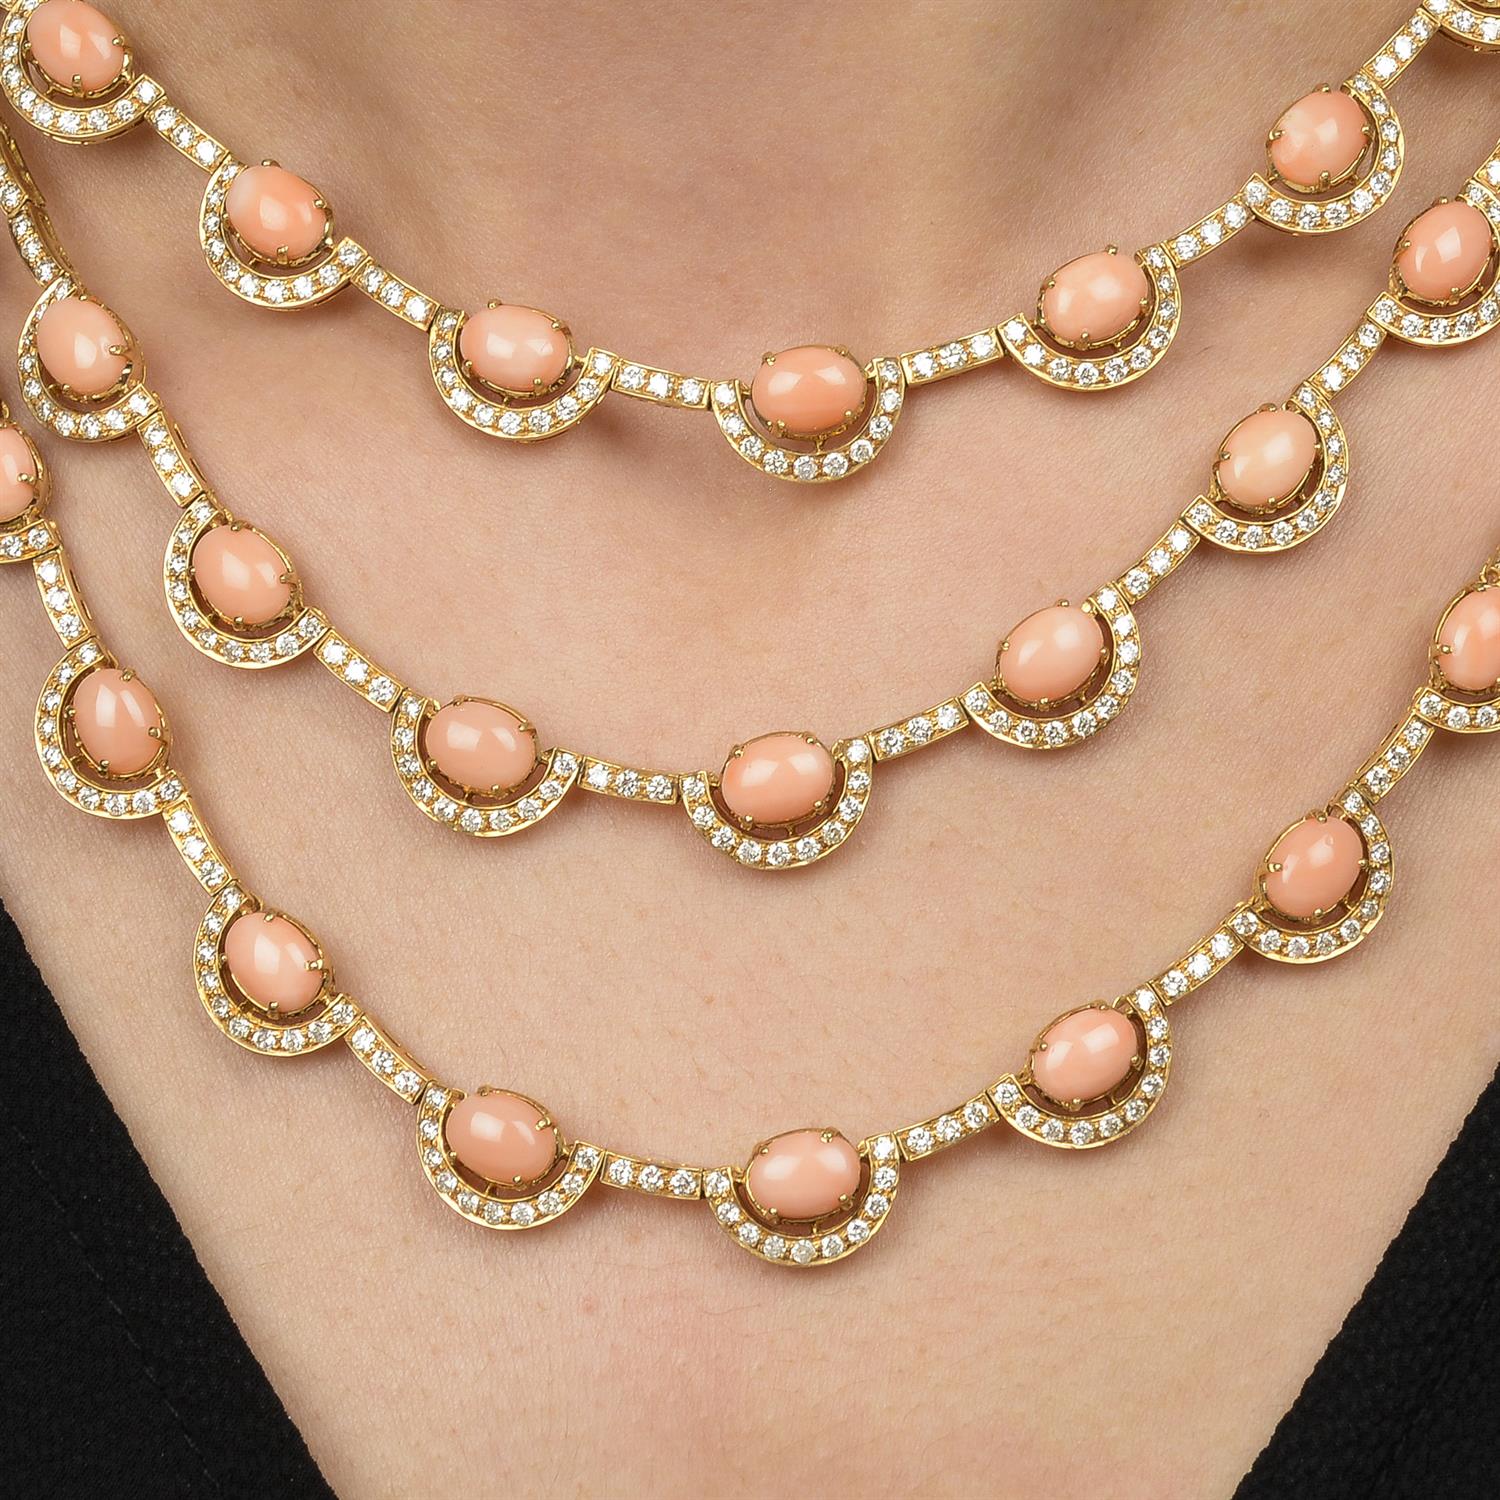 Coral and diamond necklace - Image 6 of 6